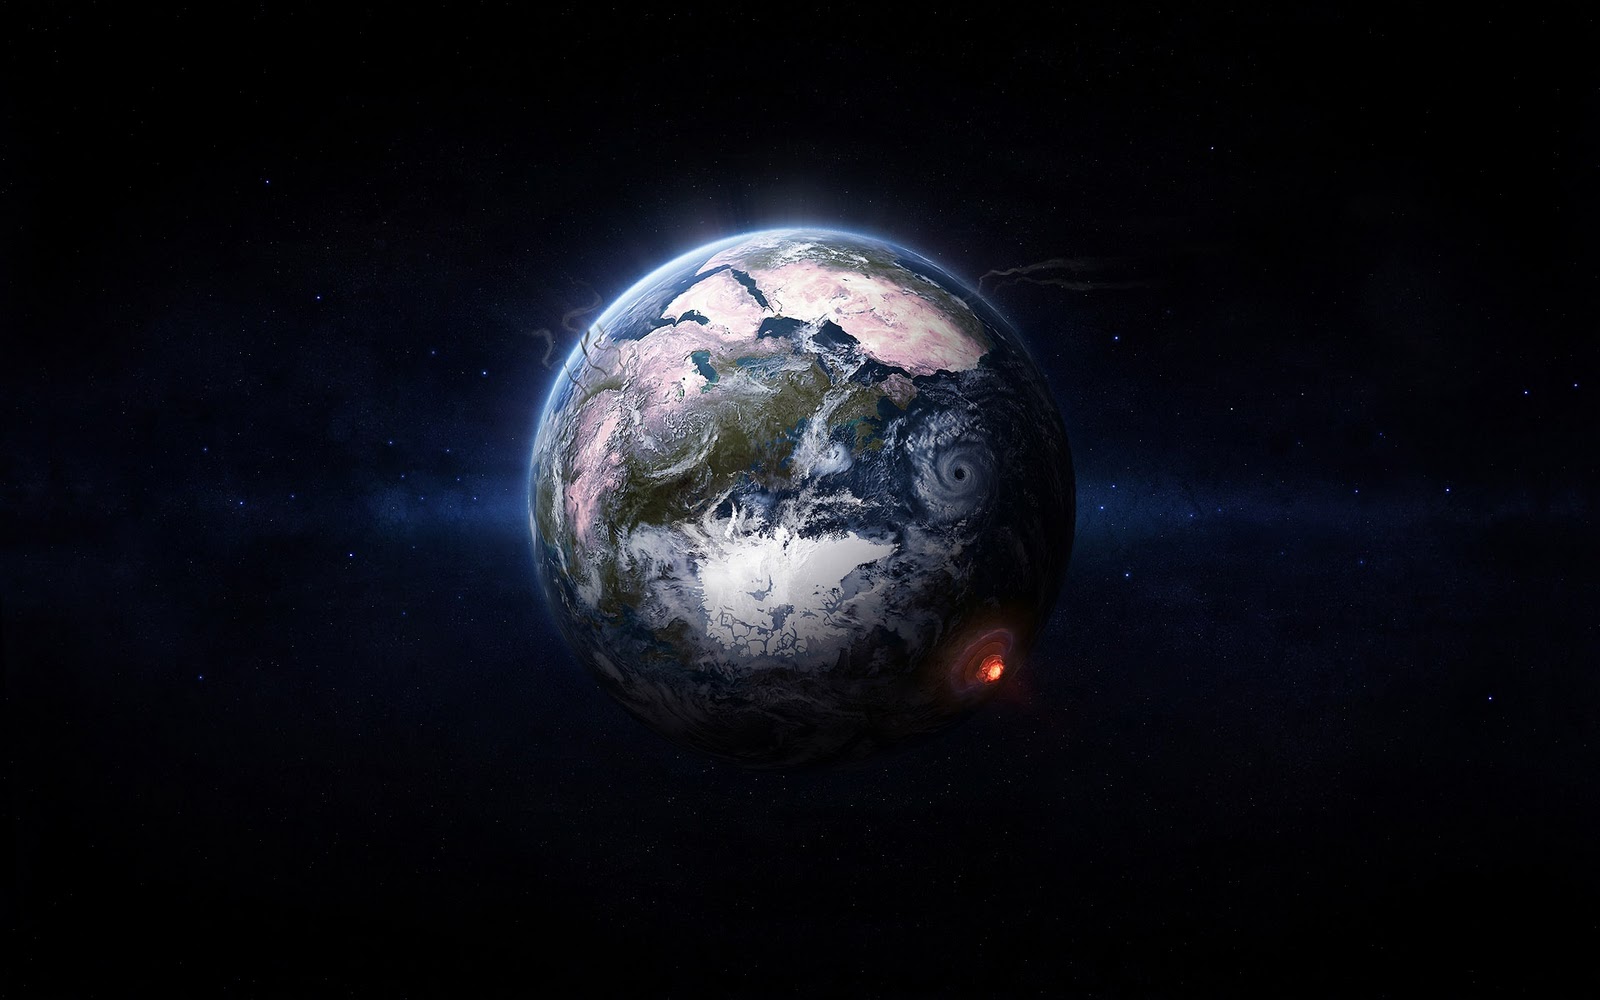 Wallpaper Space Wallpapers 0s Hd Space Wallpaper 3d Graphics Nuclear